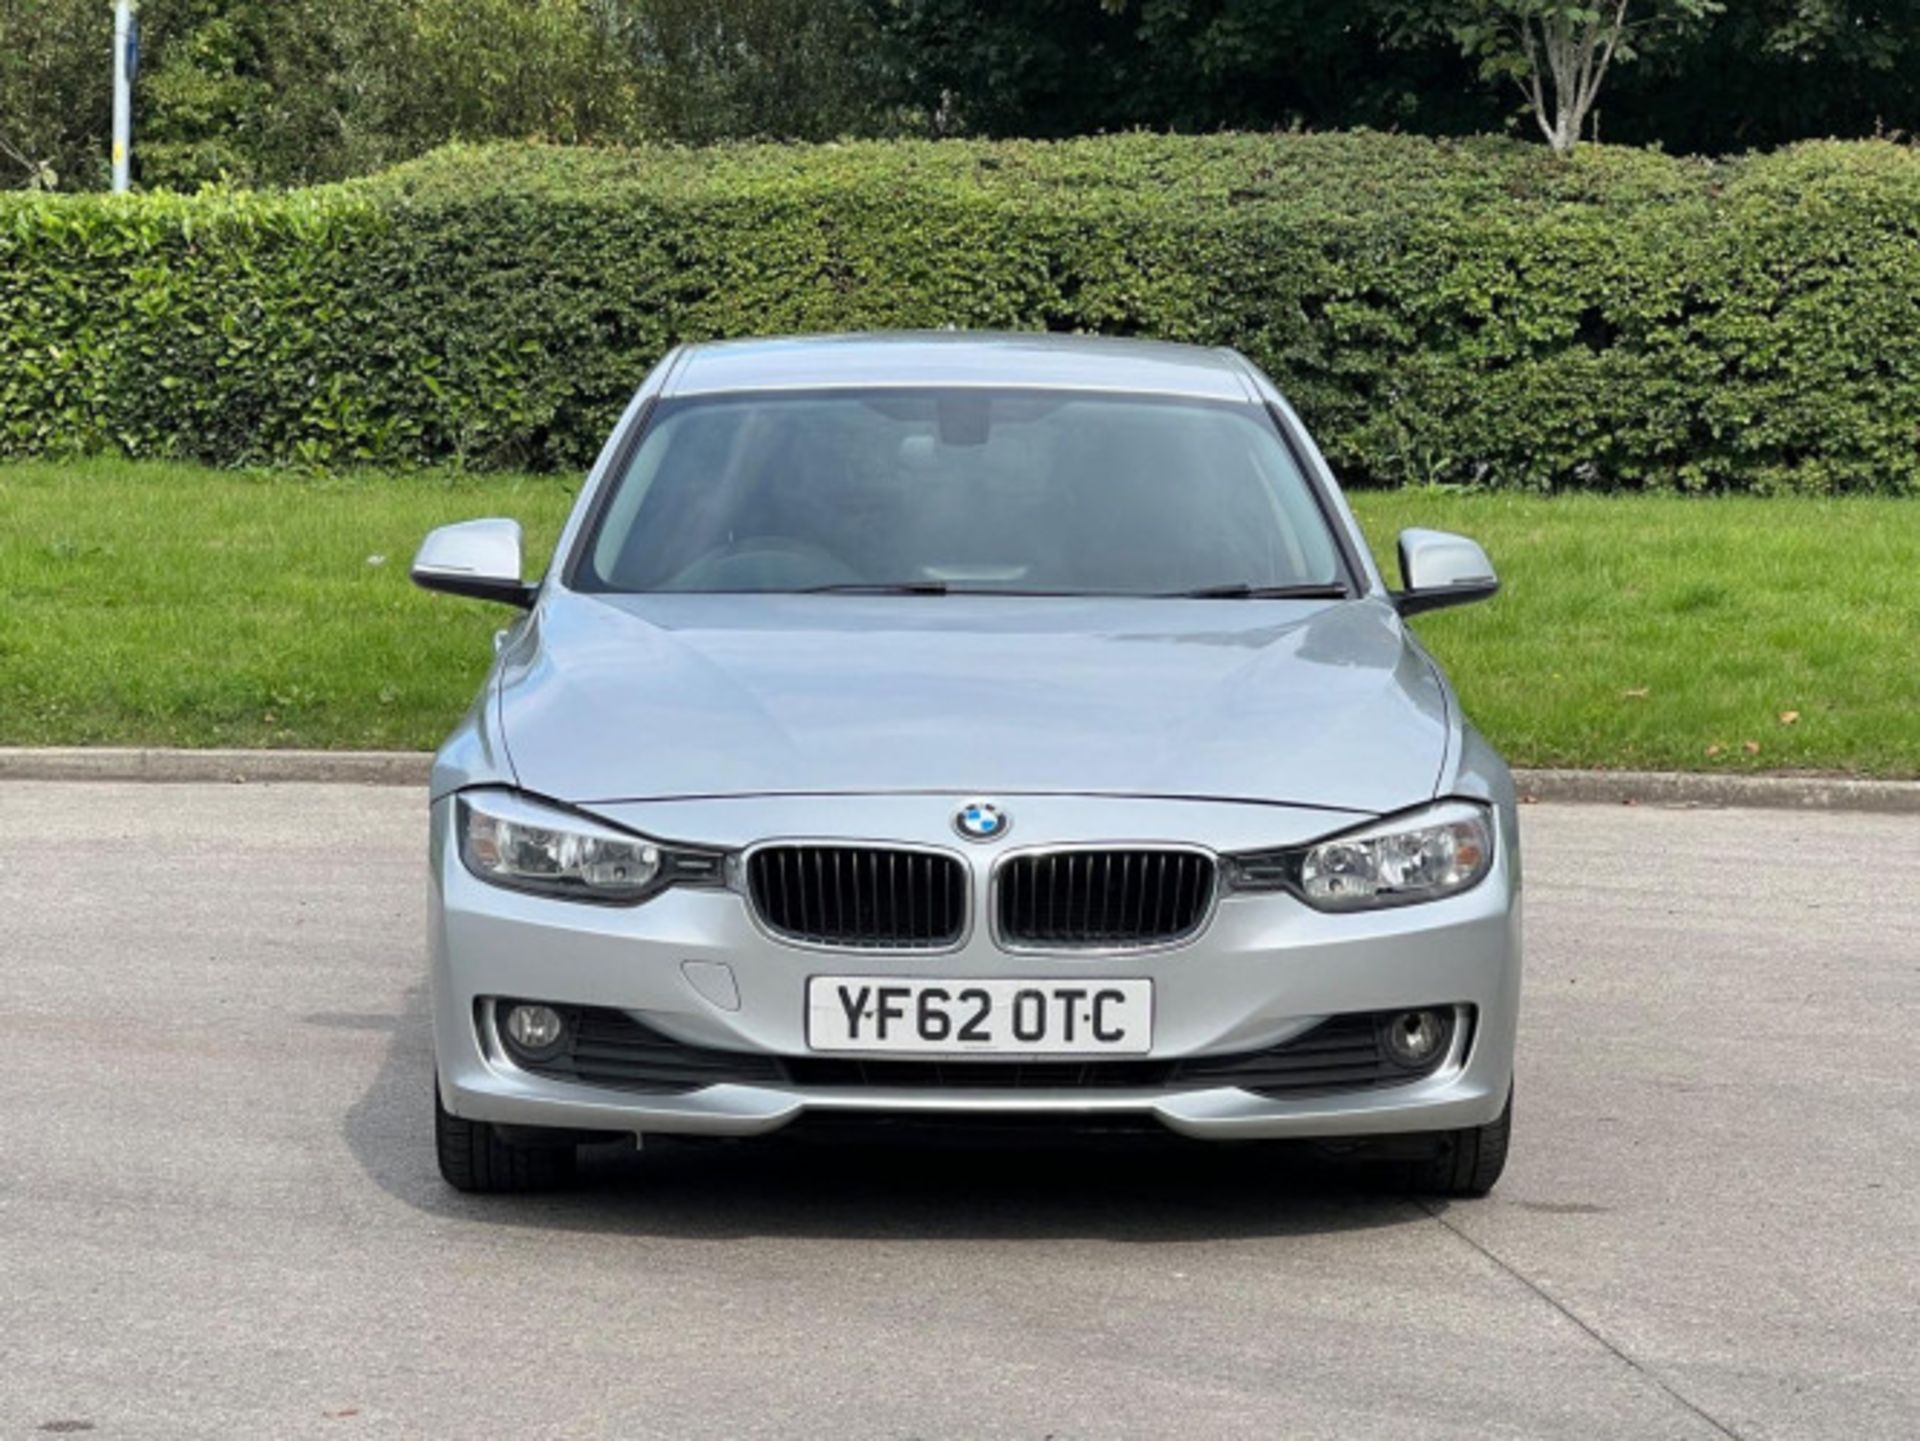 BMW 3 SERIES 2.0 DIESEL ED START STOP - A WELL-MAINTAINED GEM >>--NO VAT ON HAMMER--<< - Image 10 of 229